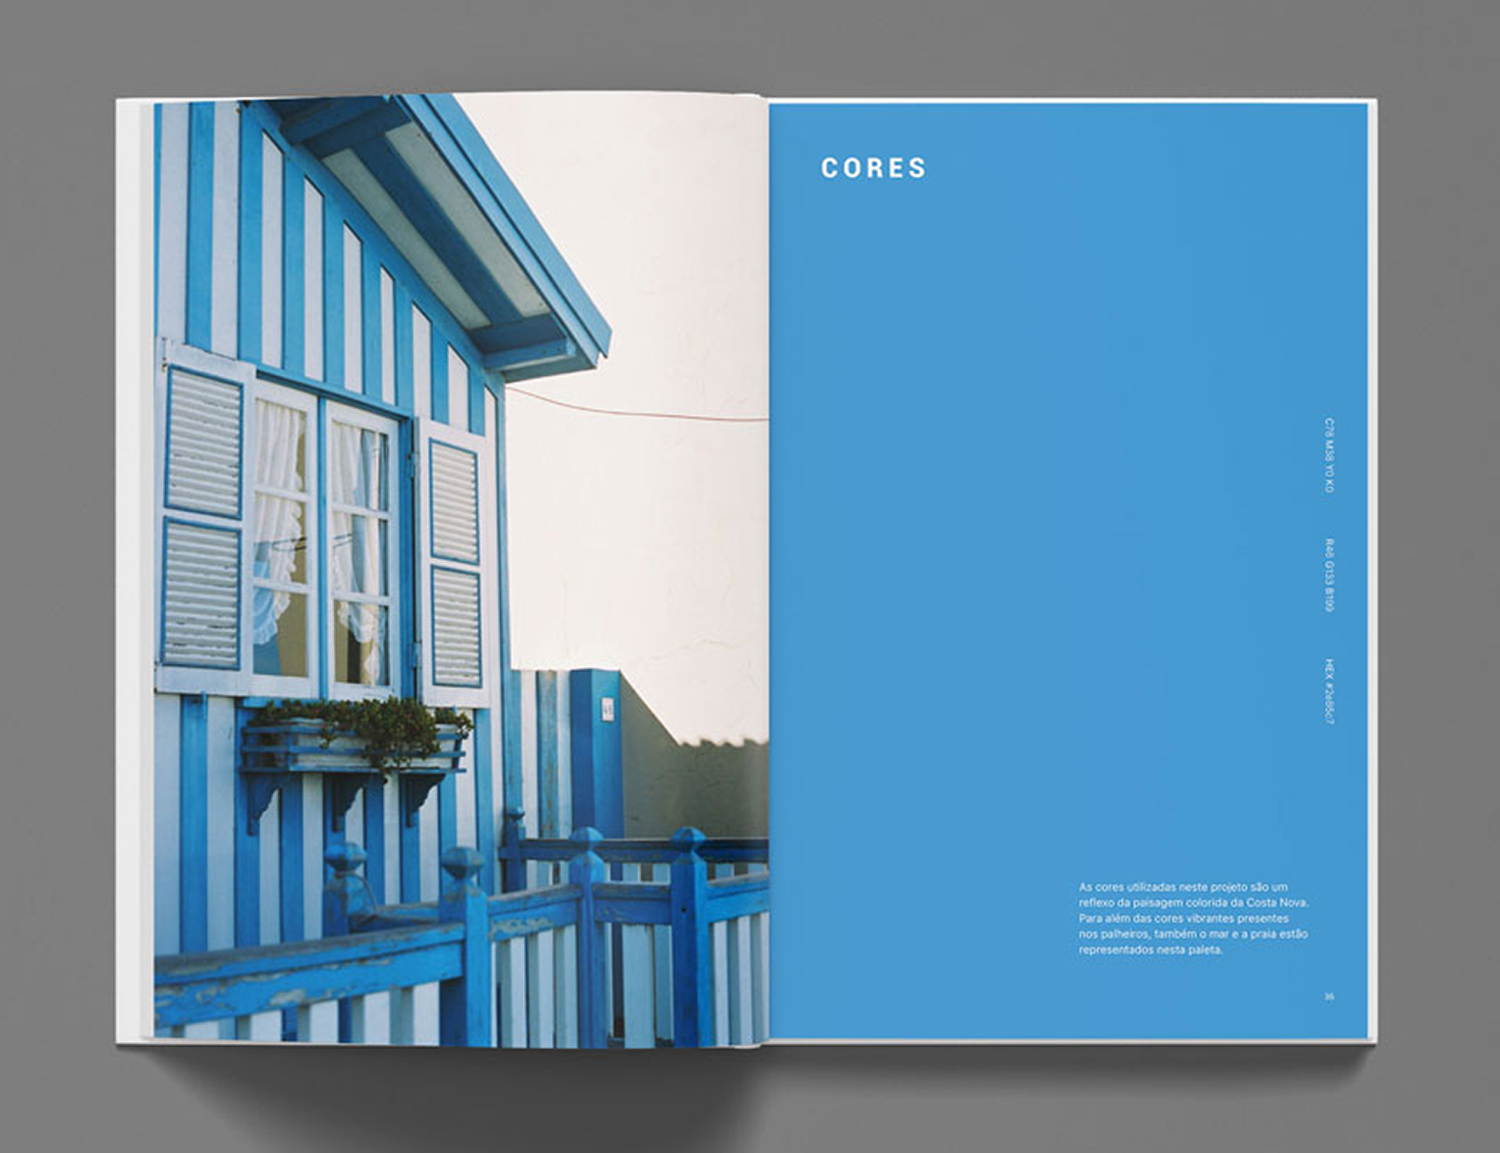 Spread of the book with text and a photo of the typical colorful houses in Costa Nova.